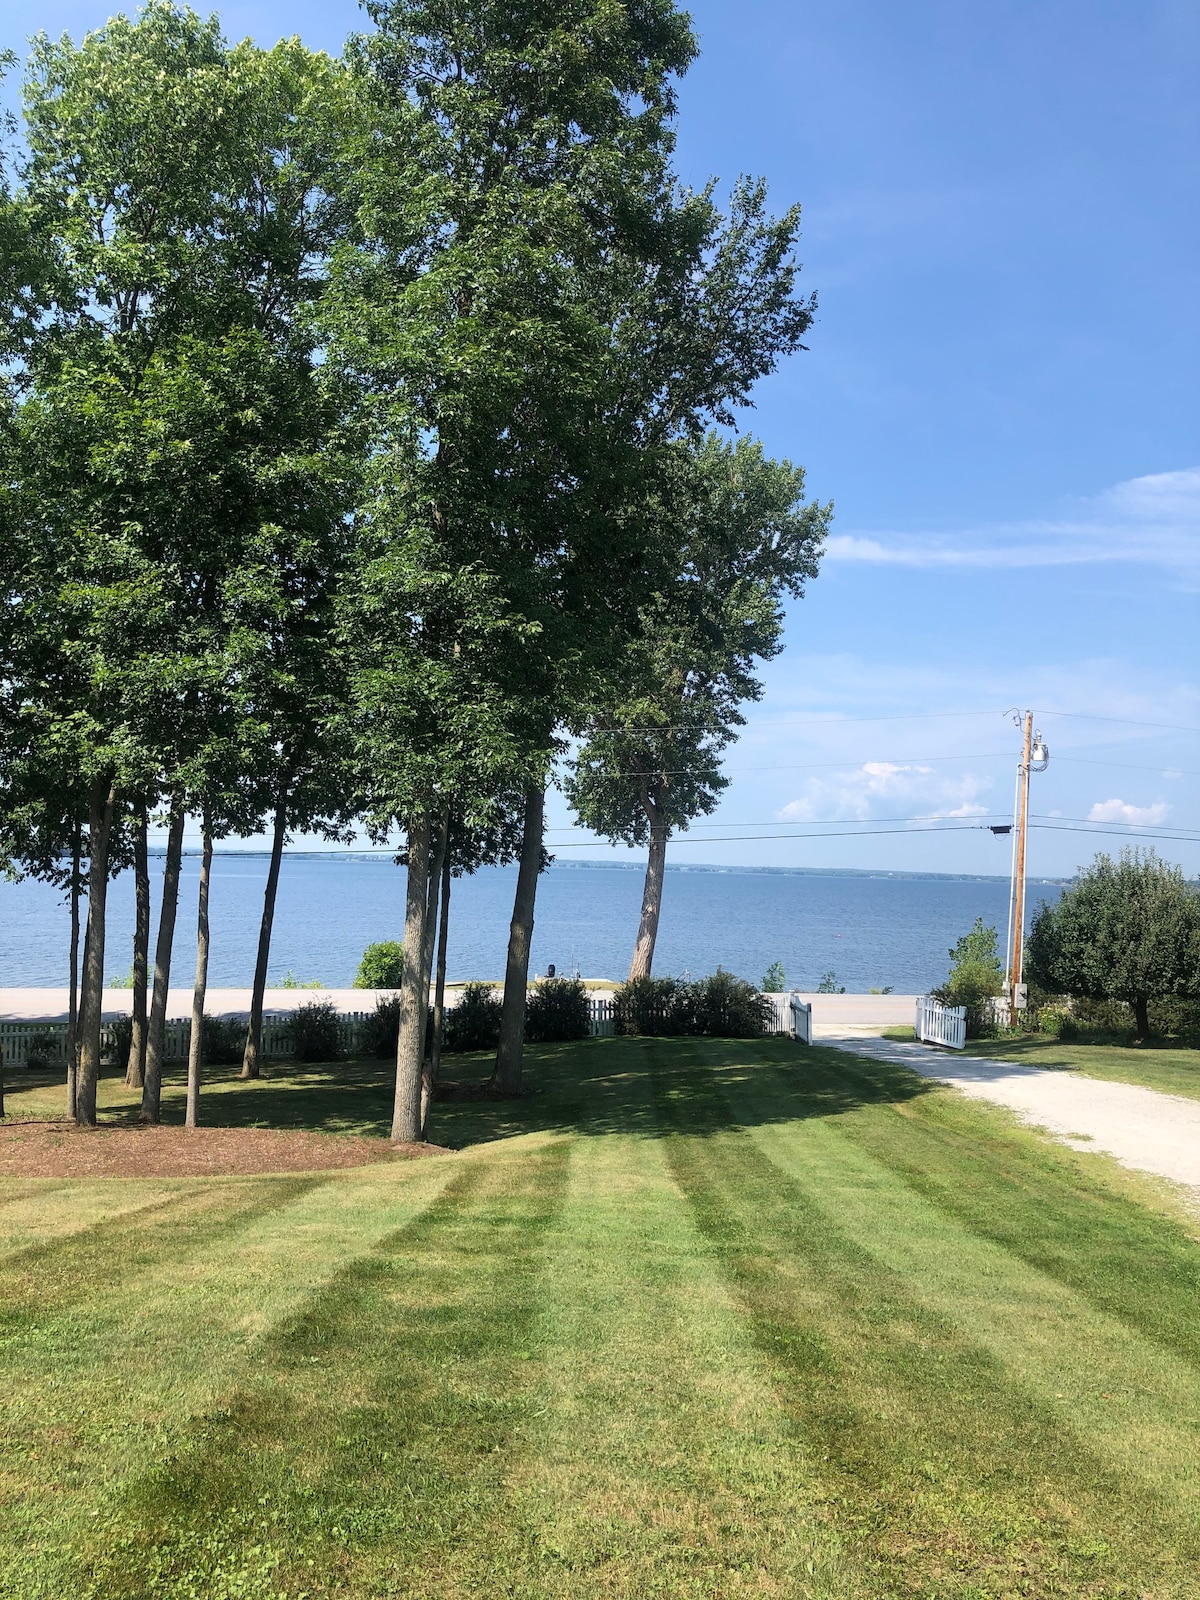 Entire Lakefront cottage, dock, nearby boat launch